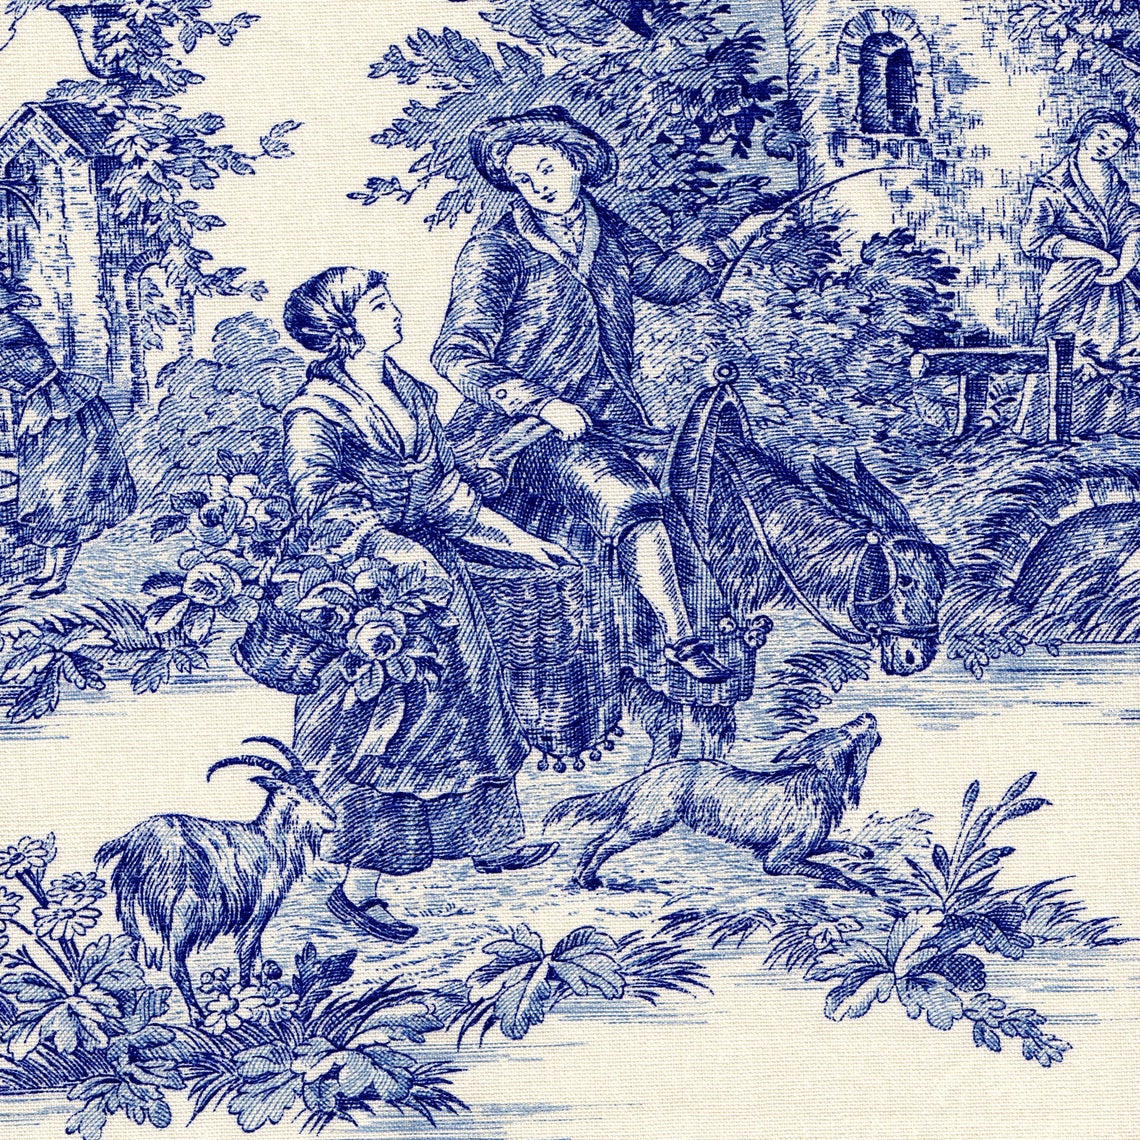 rod pocket curtain panels pair in pastorale #2 blue on cream french country toile